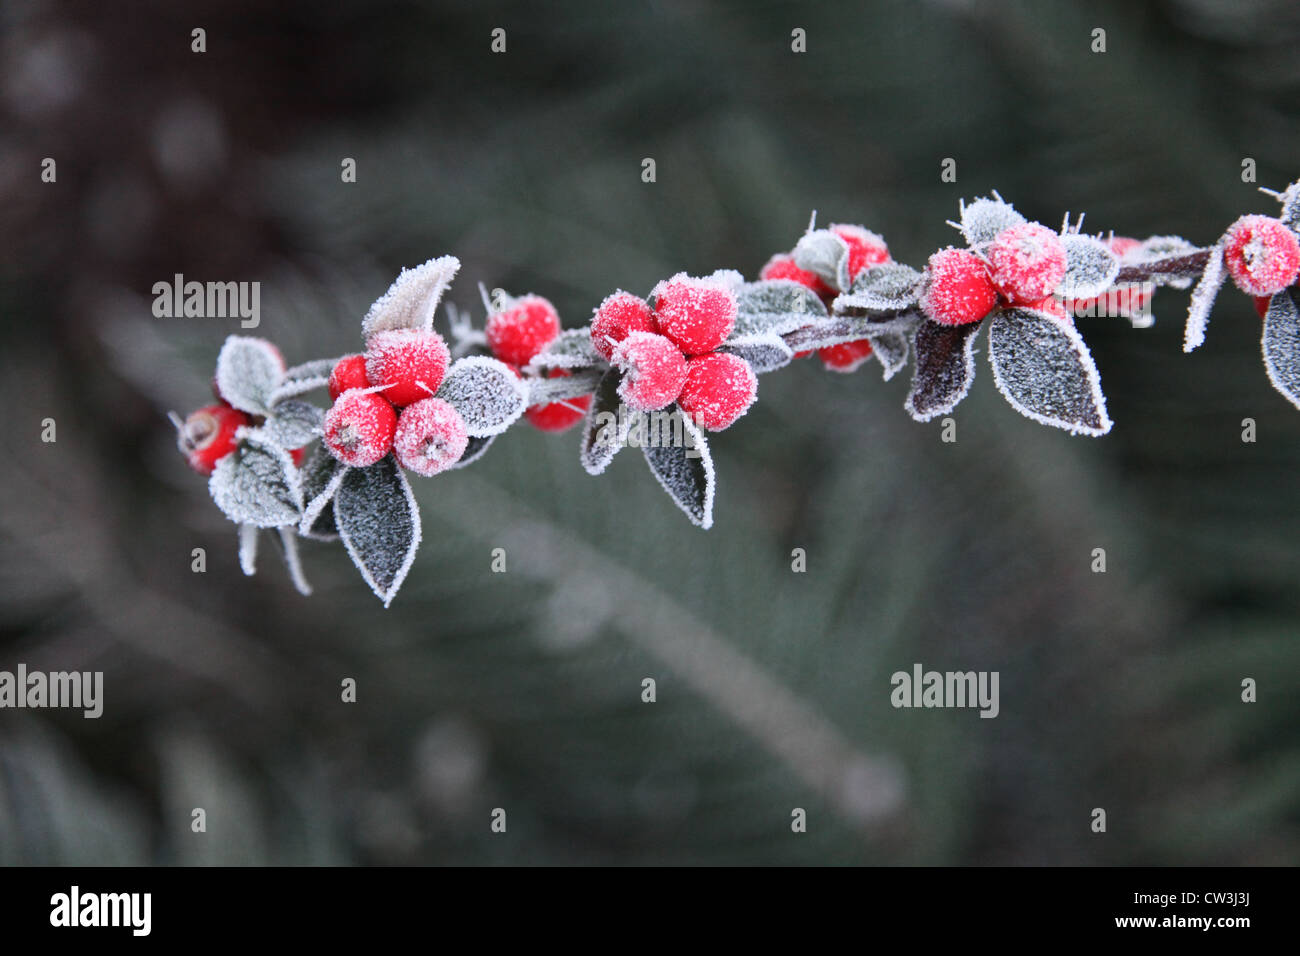 Frosty red berries Stock Photo